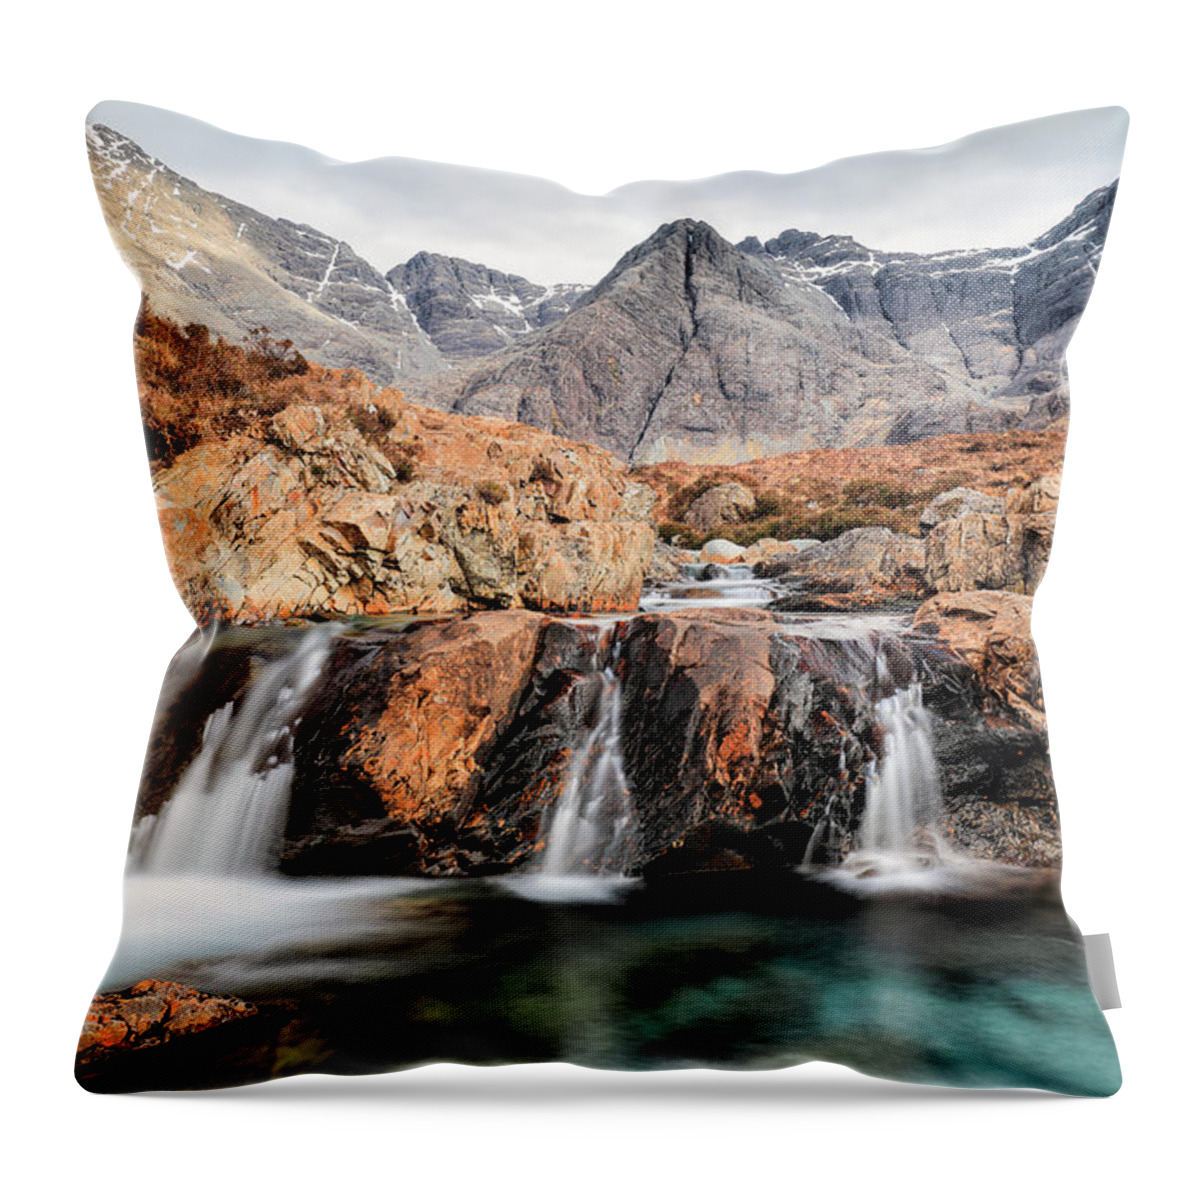 Fairy Pools Throw Pillow featuring the photograph Fairy Pools by Grant Glendinning